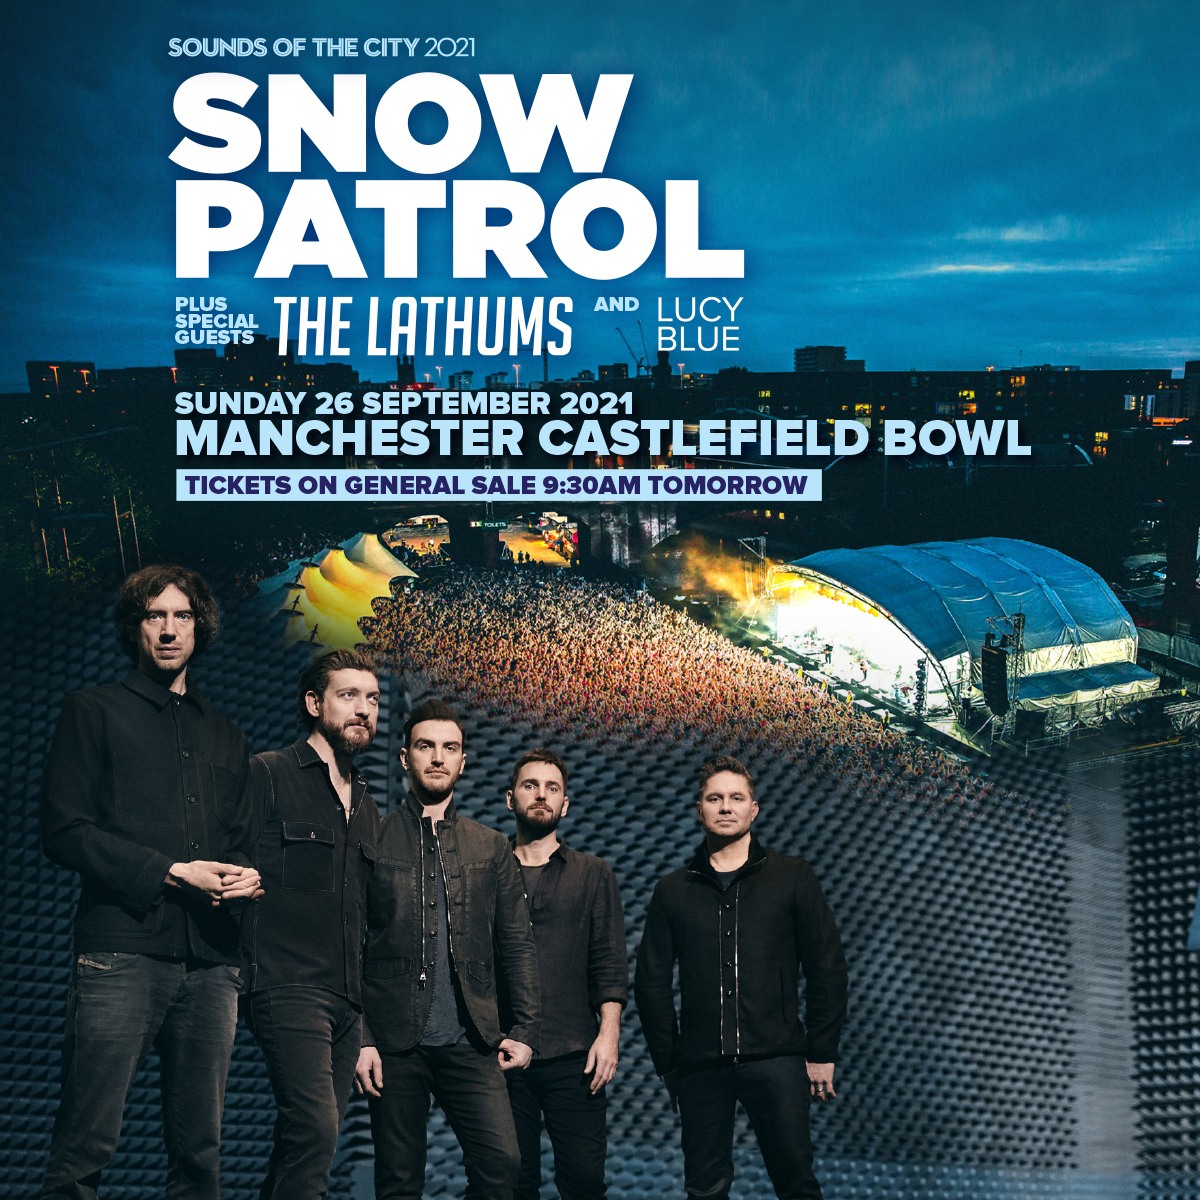 Special Guests for Manchester Castlefield Bowl announced